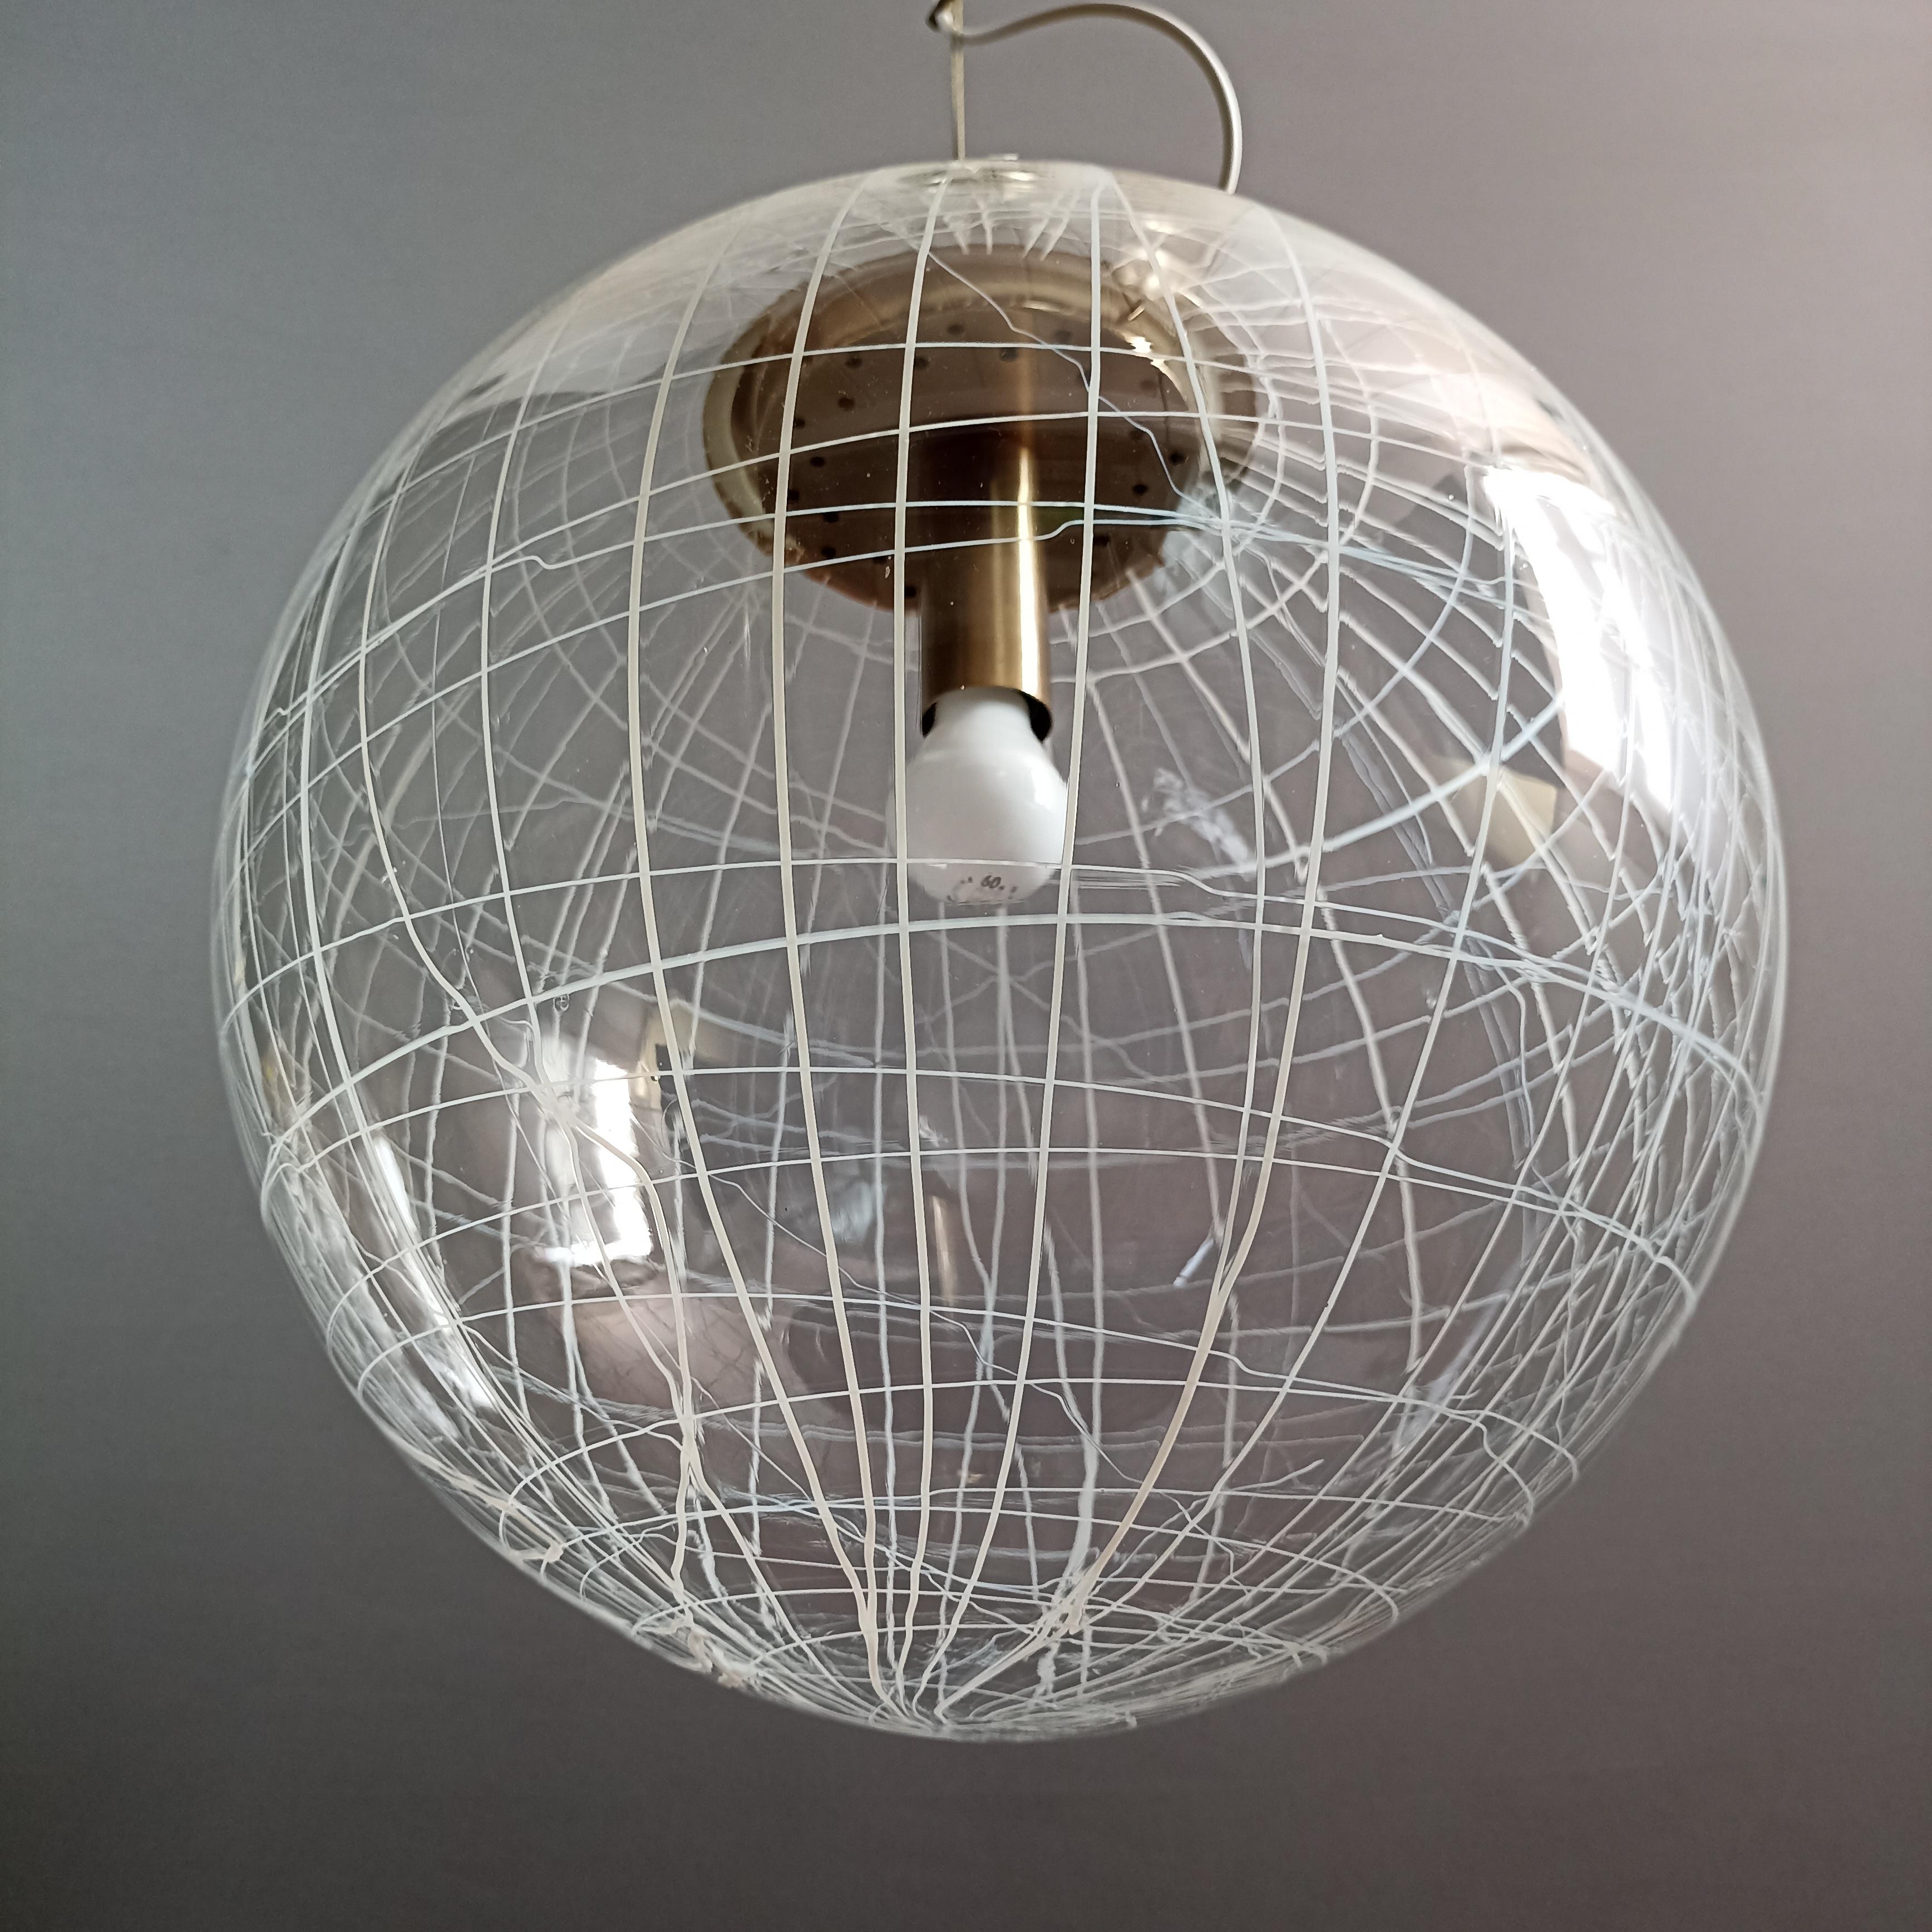 La Murrina large single-light Space Age pendant lamp from the 1970s in Murano art glass and metal frame with a brushed brass finish. The lamp is fixed to the ceiling with a double steel wire.
The surface of the transparent glass sphere appears as